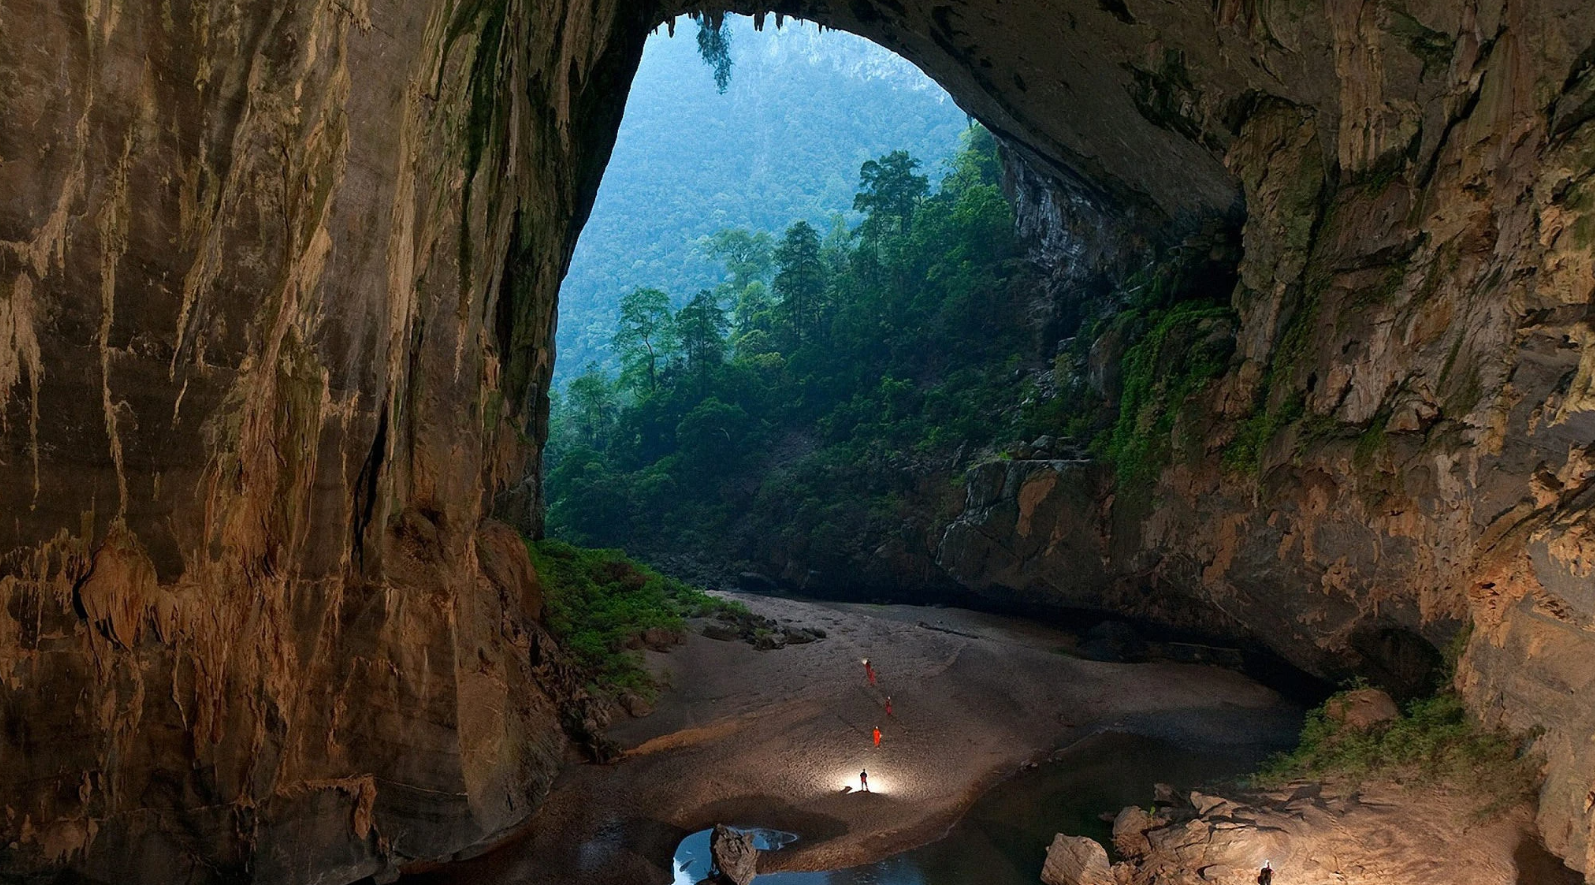 The largest cave in the world